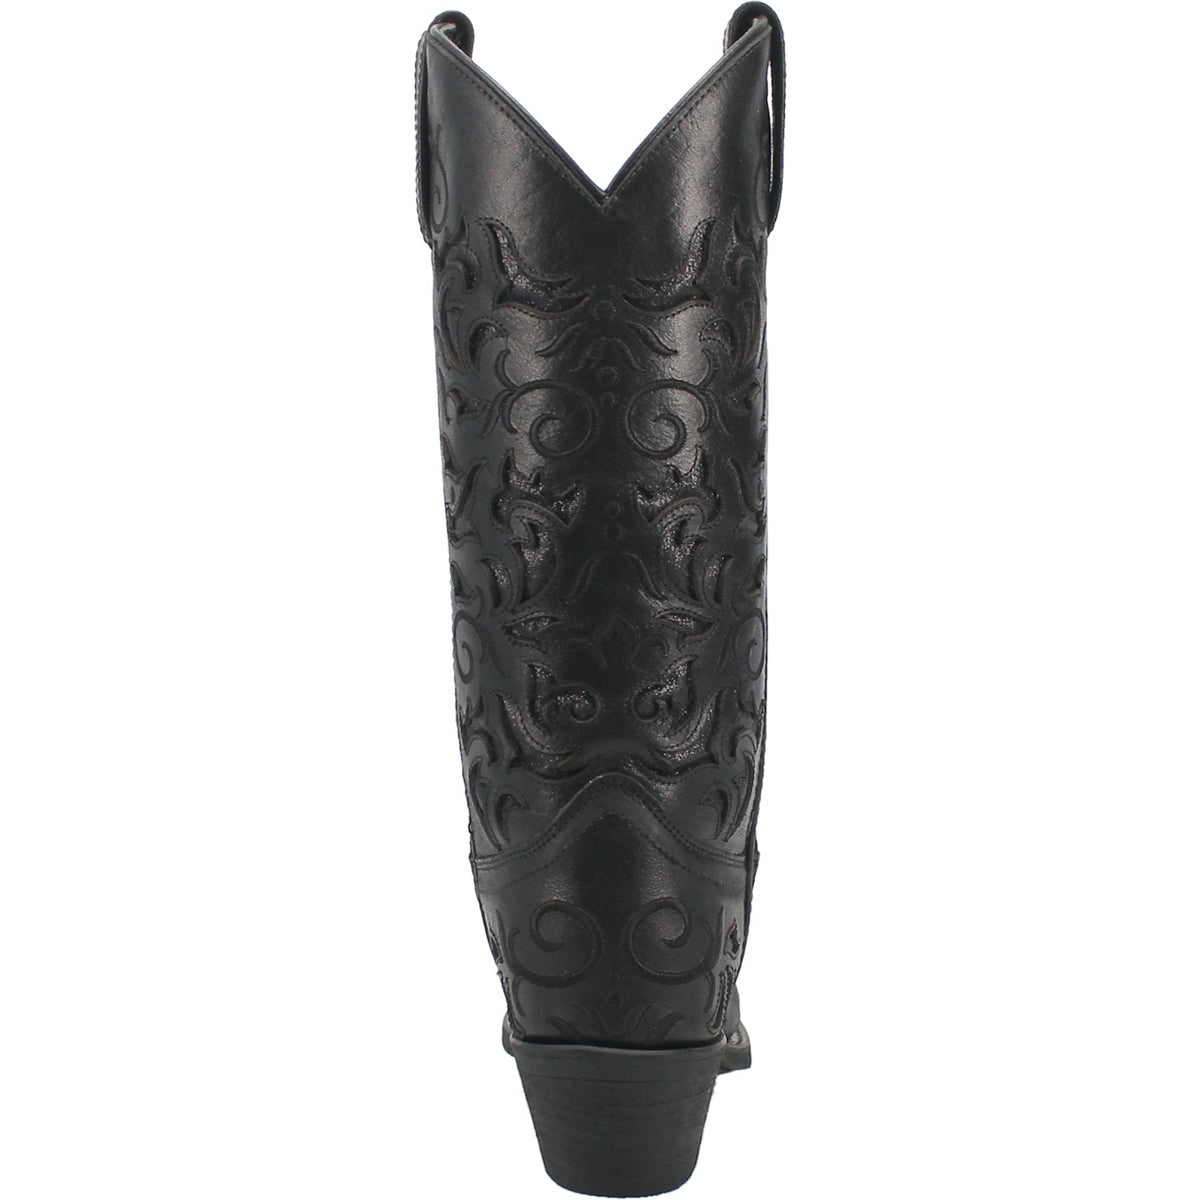 NIGHT SKY LEATHER BOOT Cover